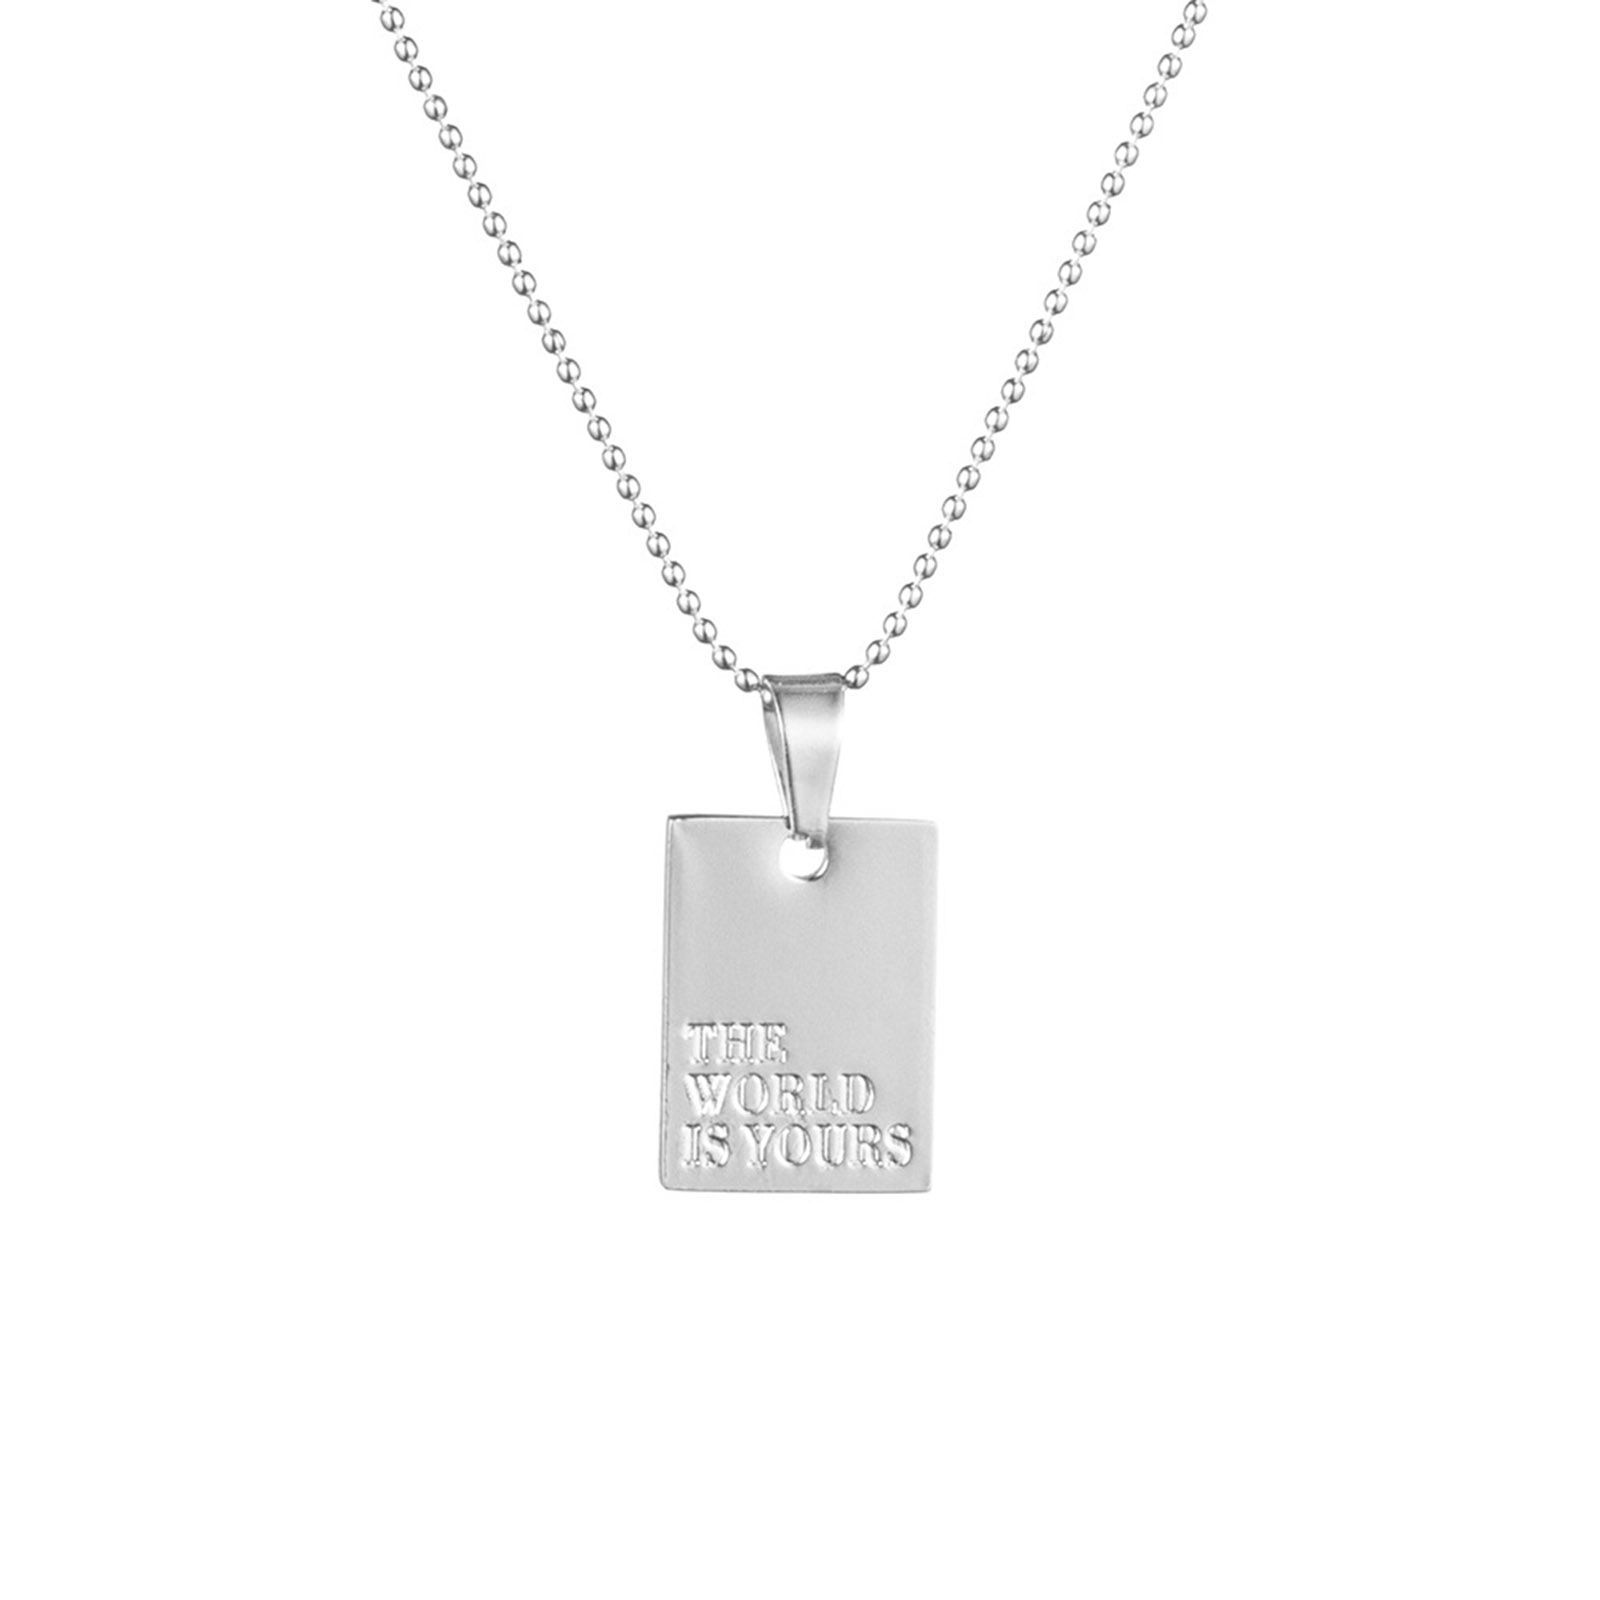 Picture of 304 Stainless Steel Stylish Necklace Silver Tone English Vocabulary Message " The World Is Yours " 39cm(15 3/8") long, 1 Piece